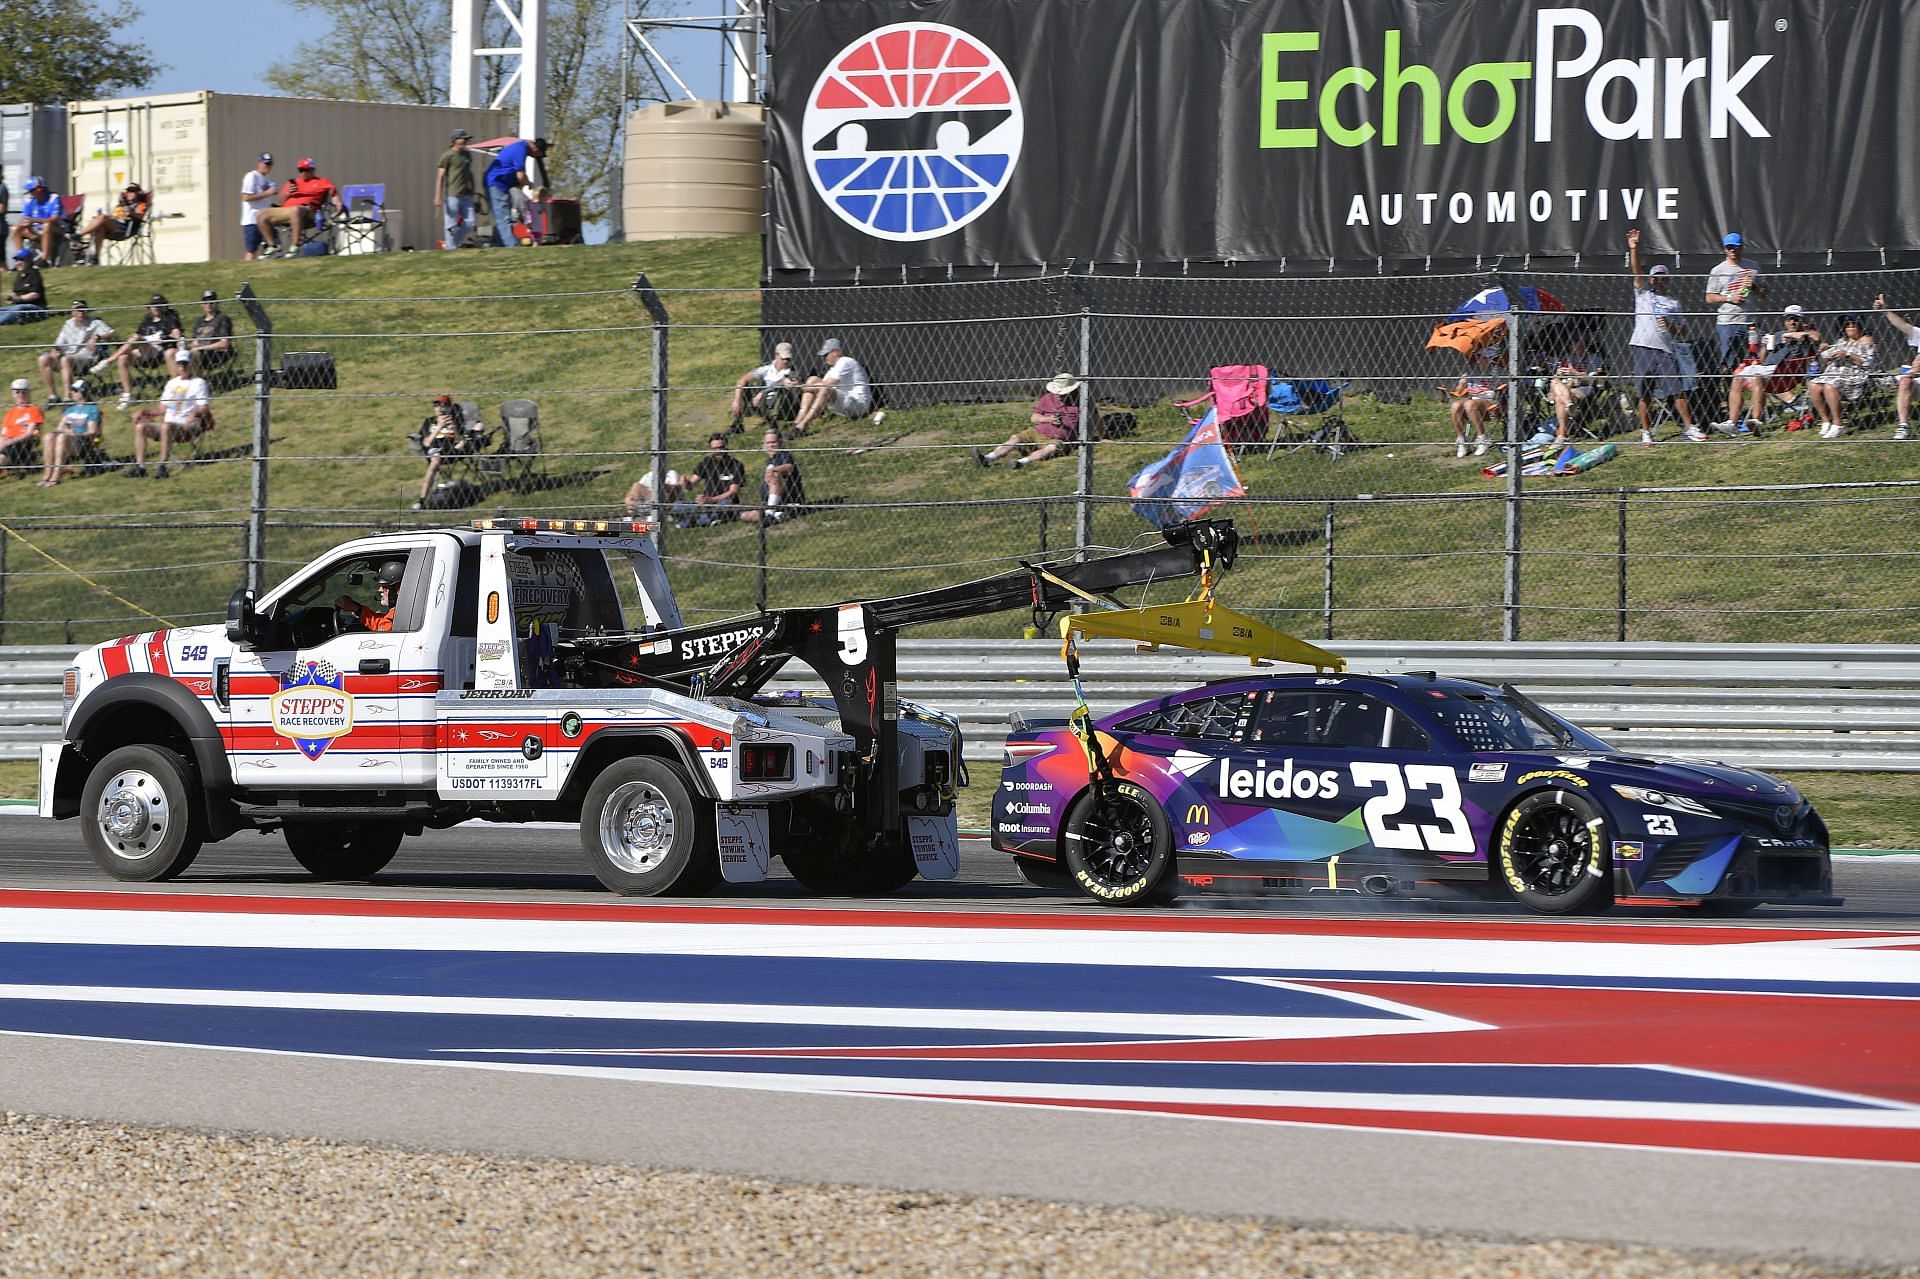 The No. 23 Toyota of Bubba Wallace Jr. being towed during the NASCAR Cup Series Echopark Automotive Grand Prix at Circuit of The Americas in Austin, Texas. (Photo by Logan Riely/Getty Images)